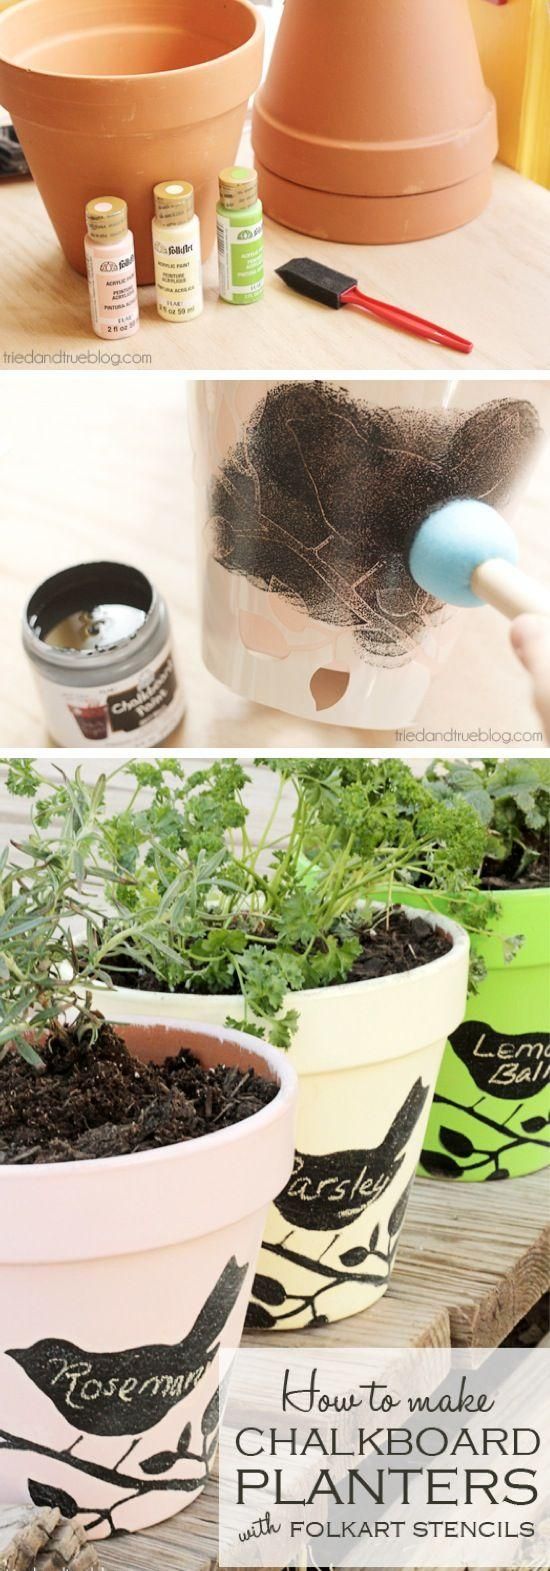 DIY Chalkboard Pots With Folkart Stencils And Paint 